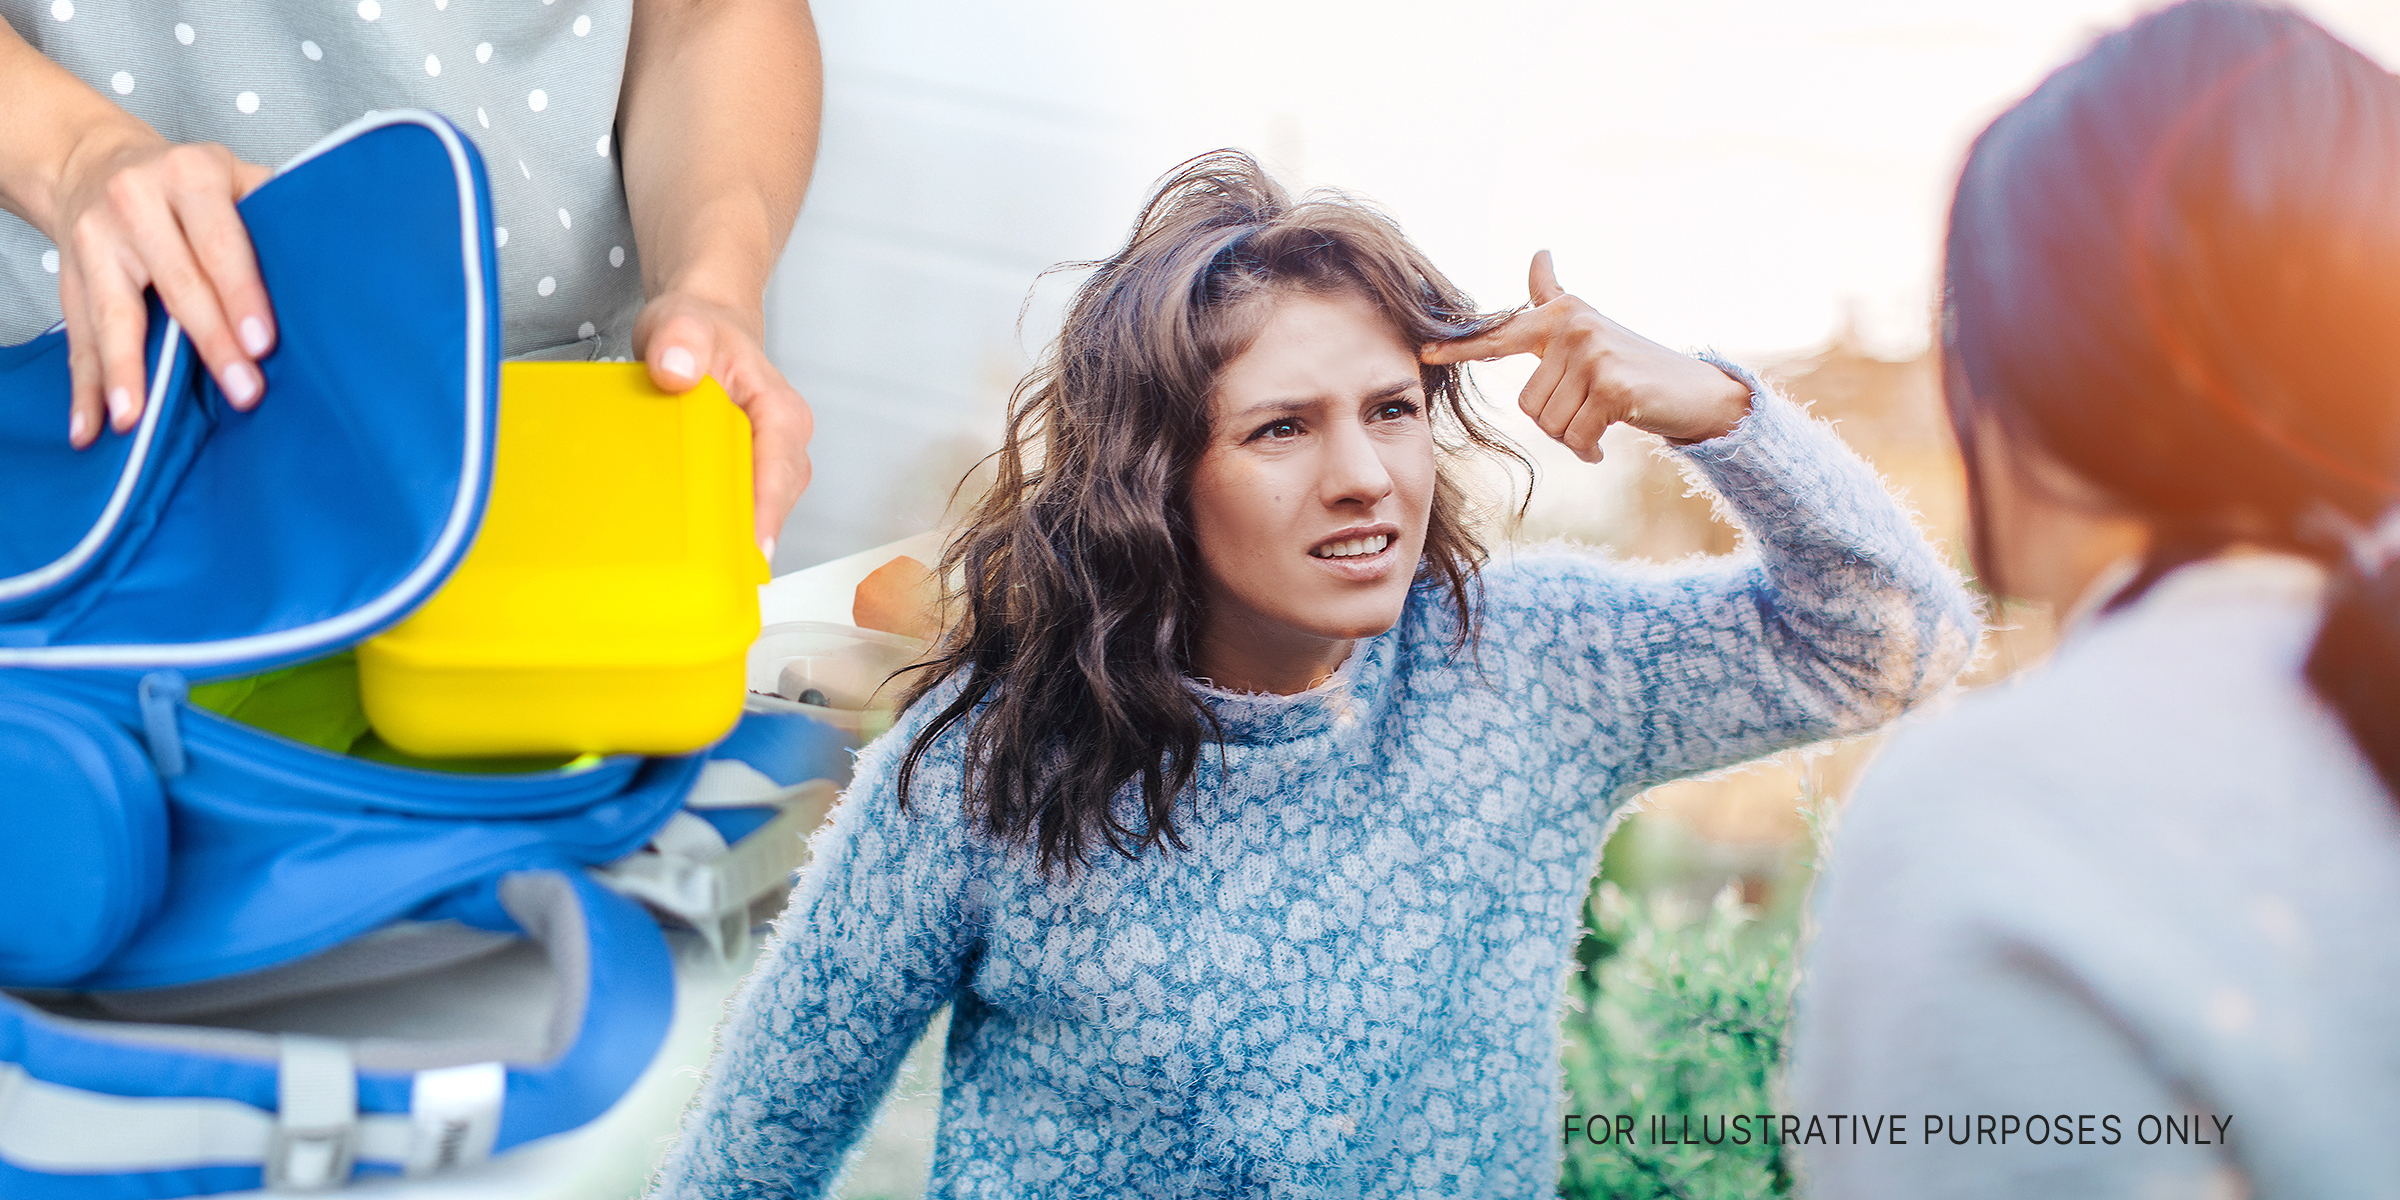 An angry woman | Source: Shutterstock